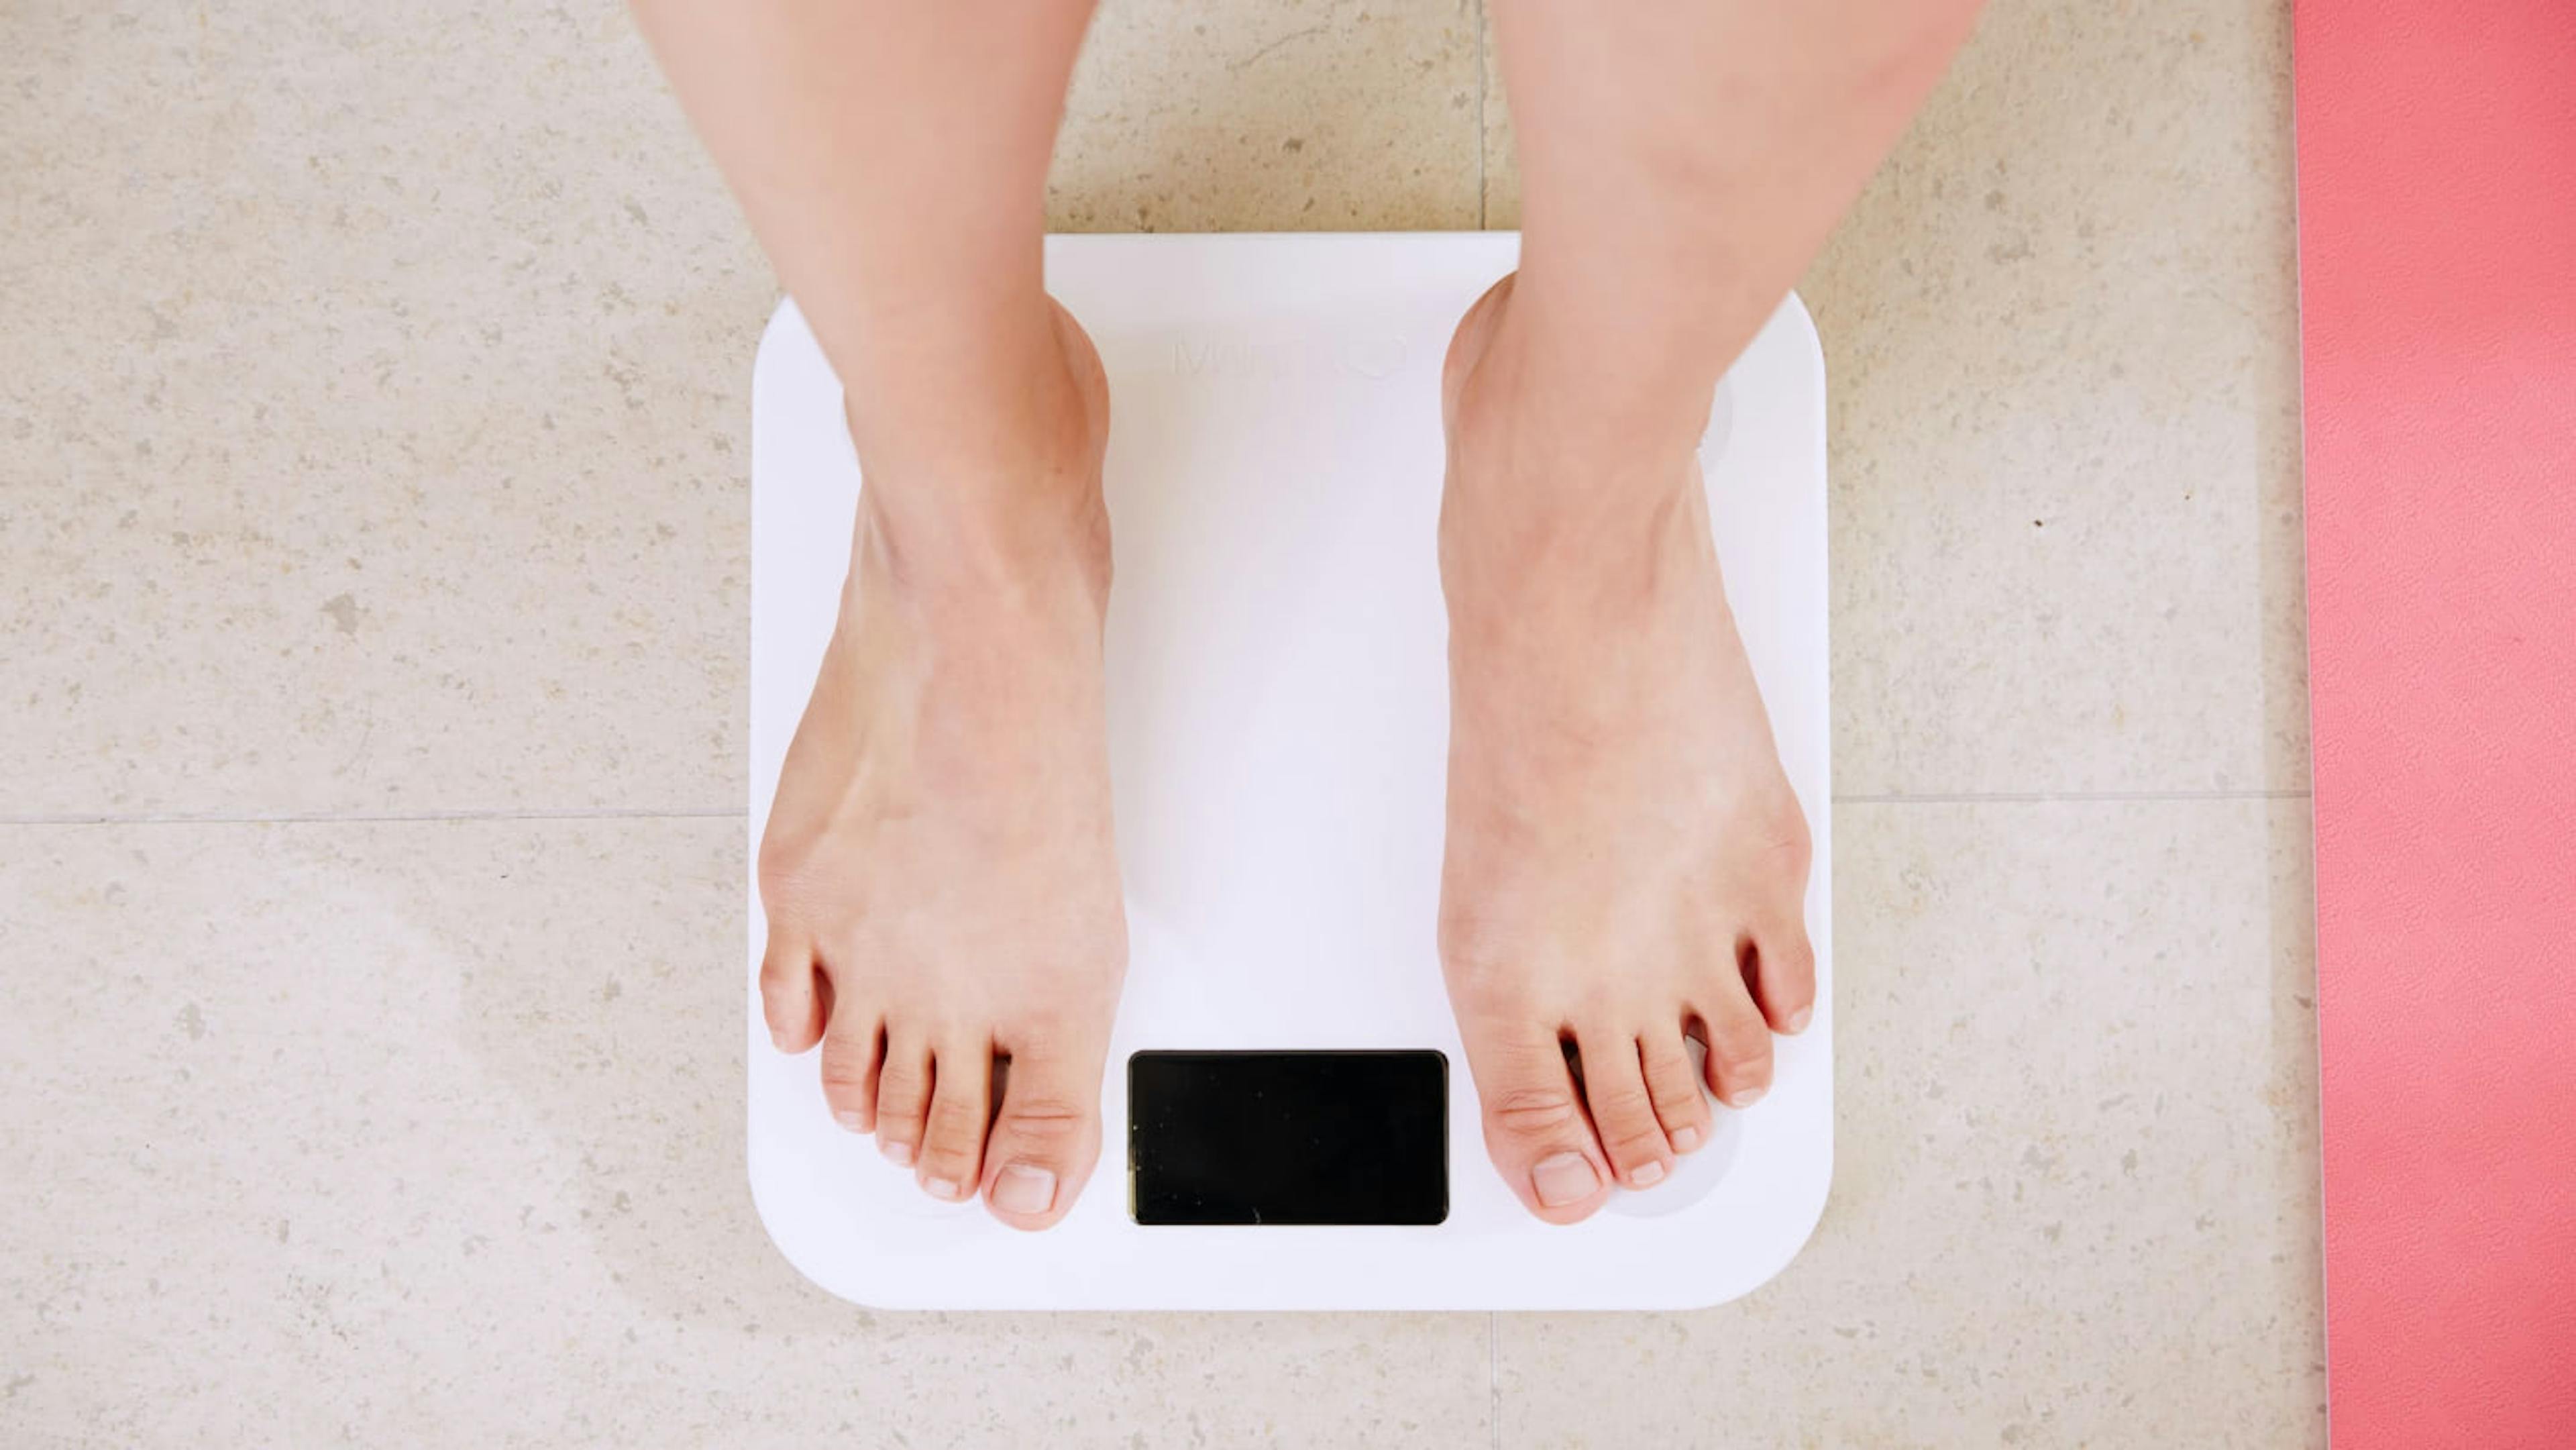 A person who struggles with their weight stands on a scale.